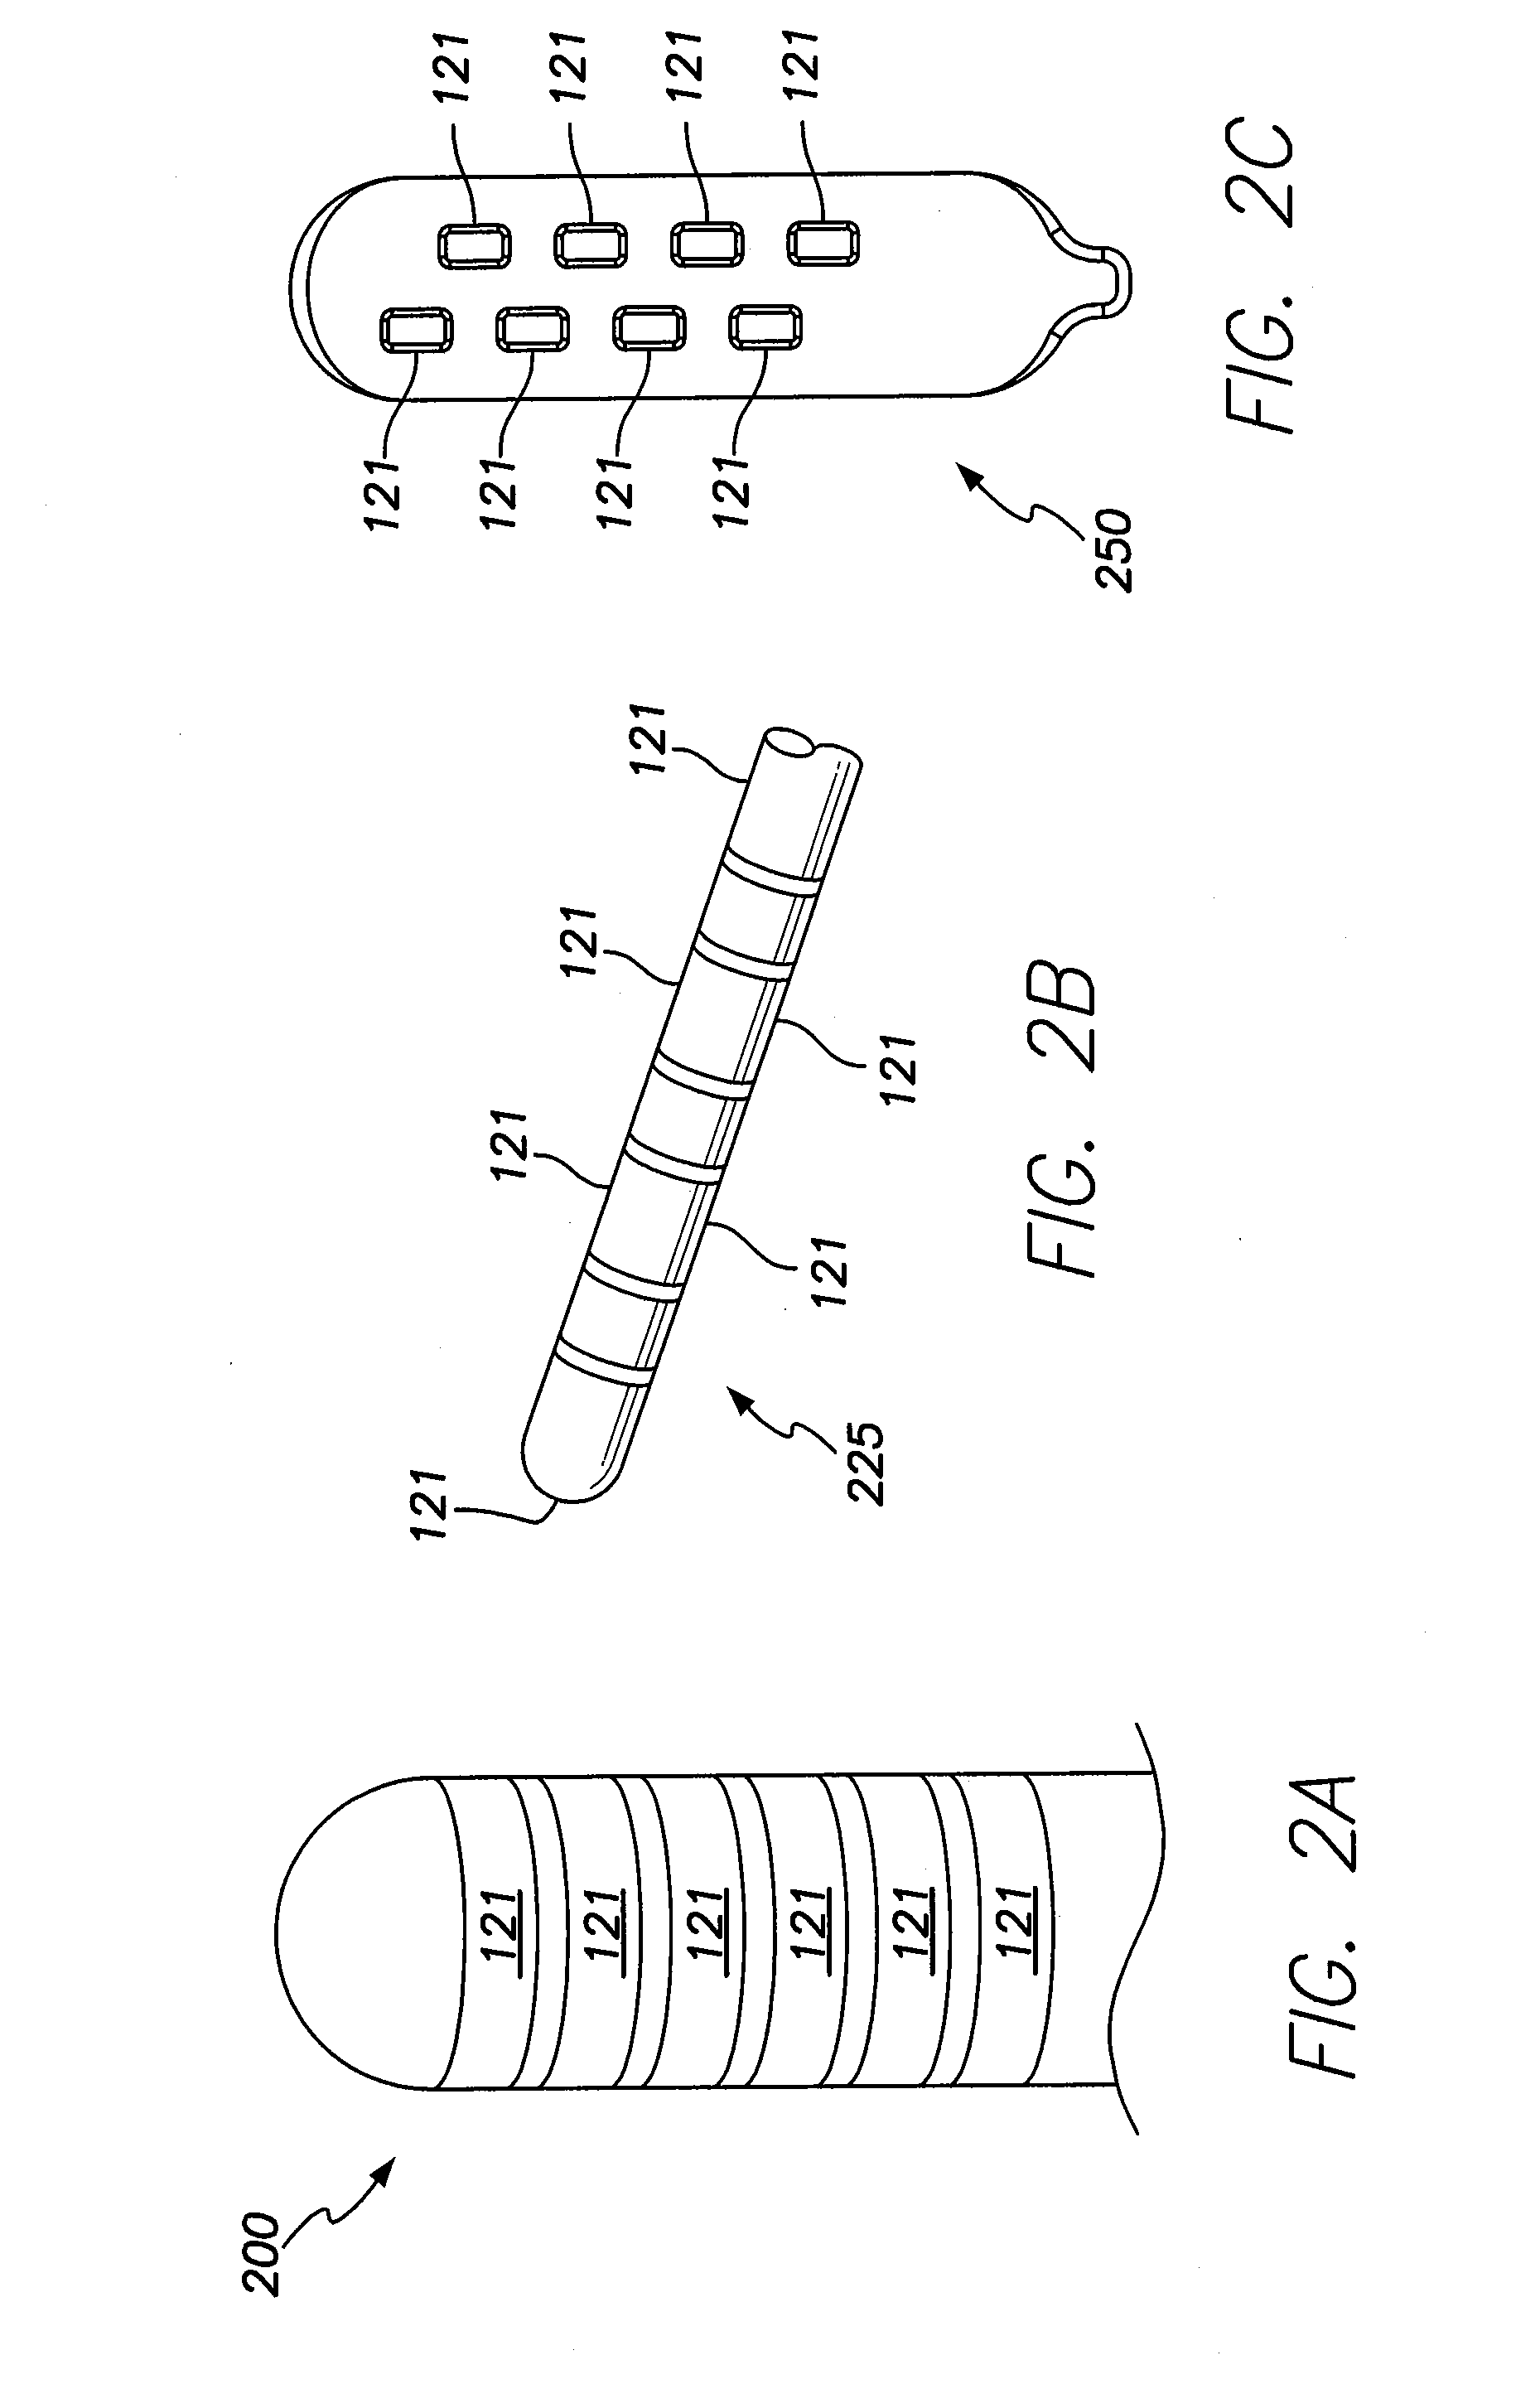 System and method for coupling burst and tonic stimulation